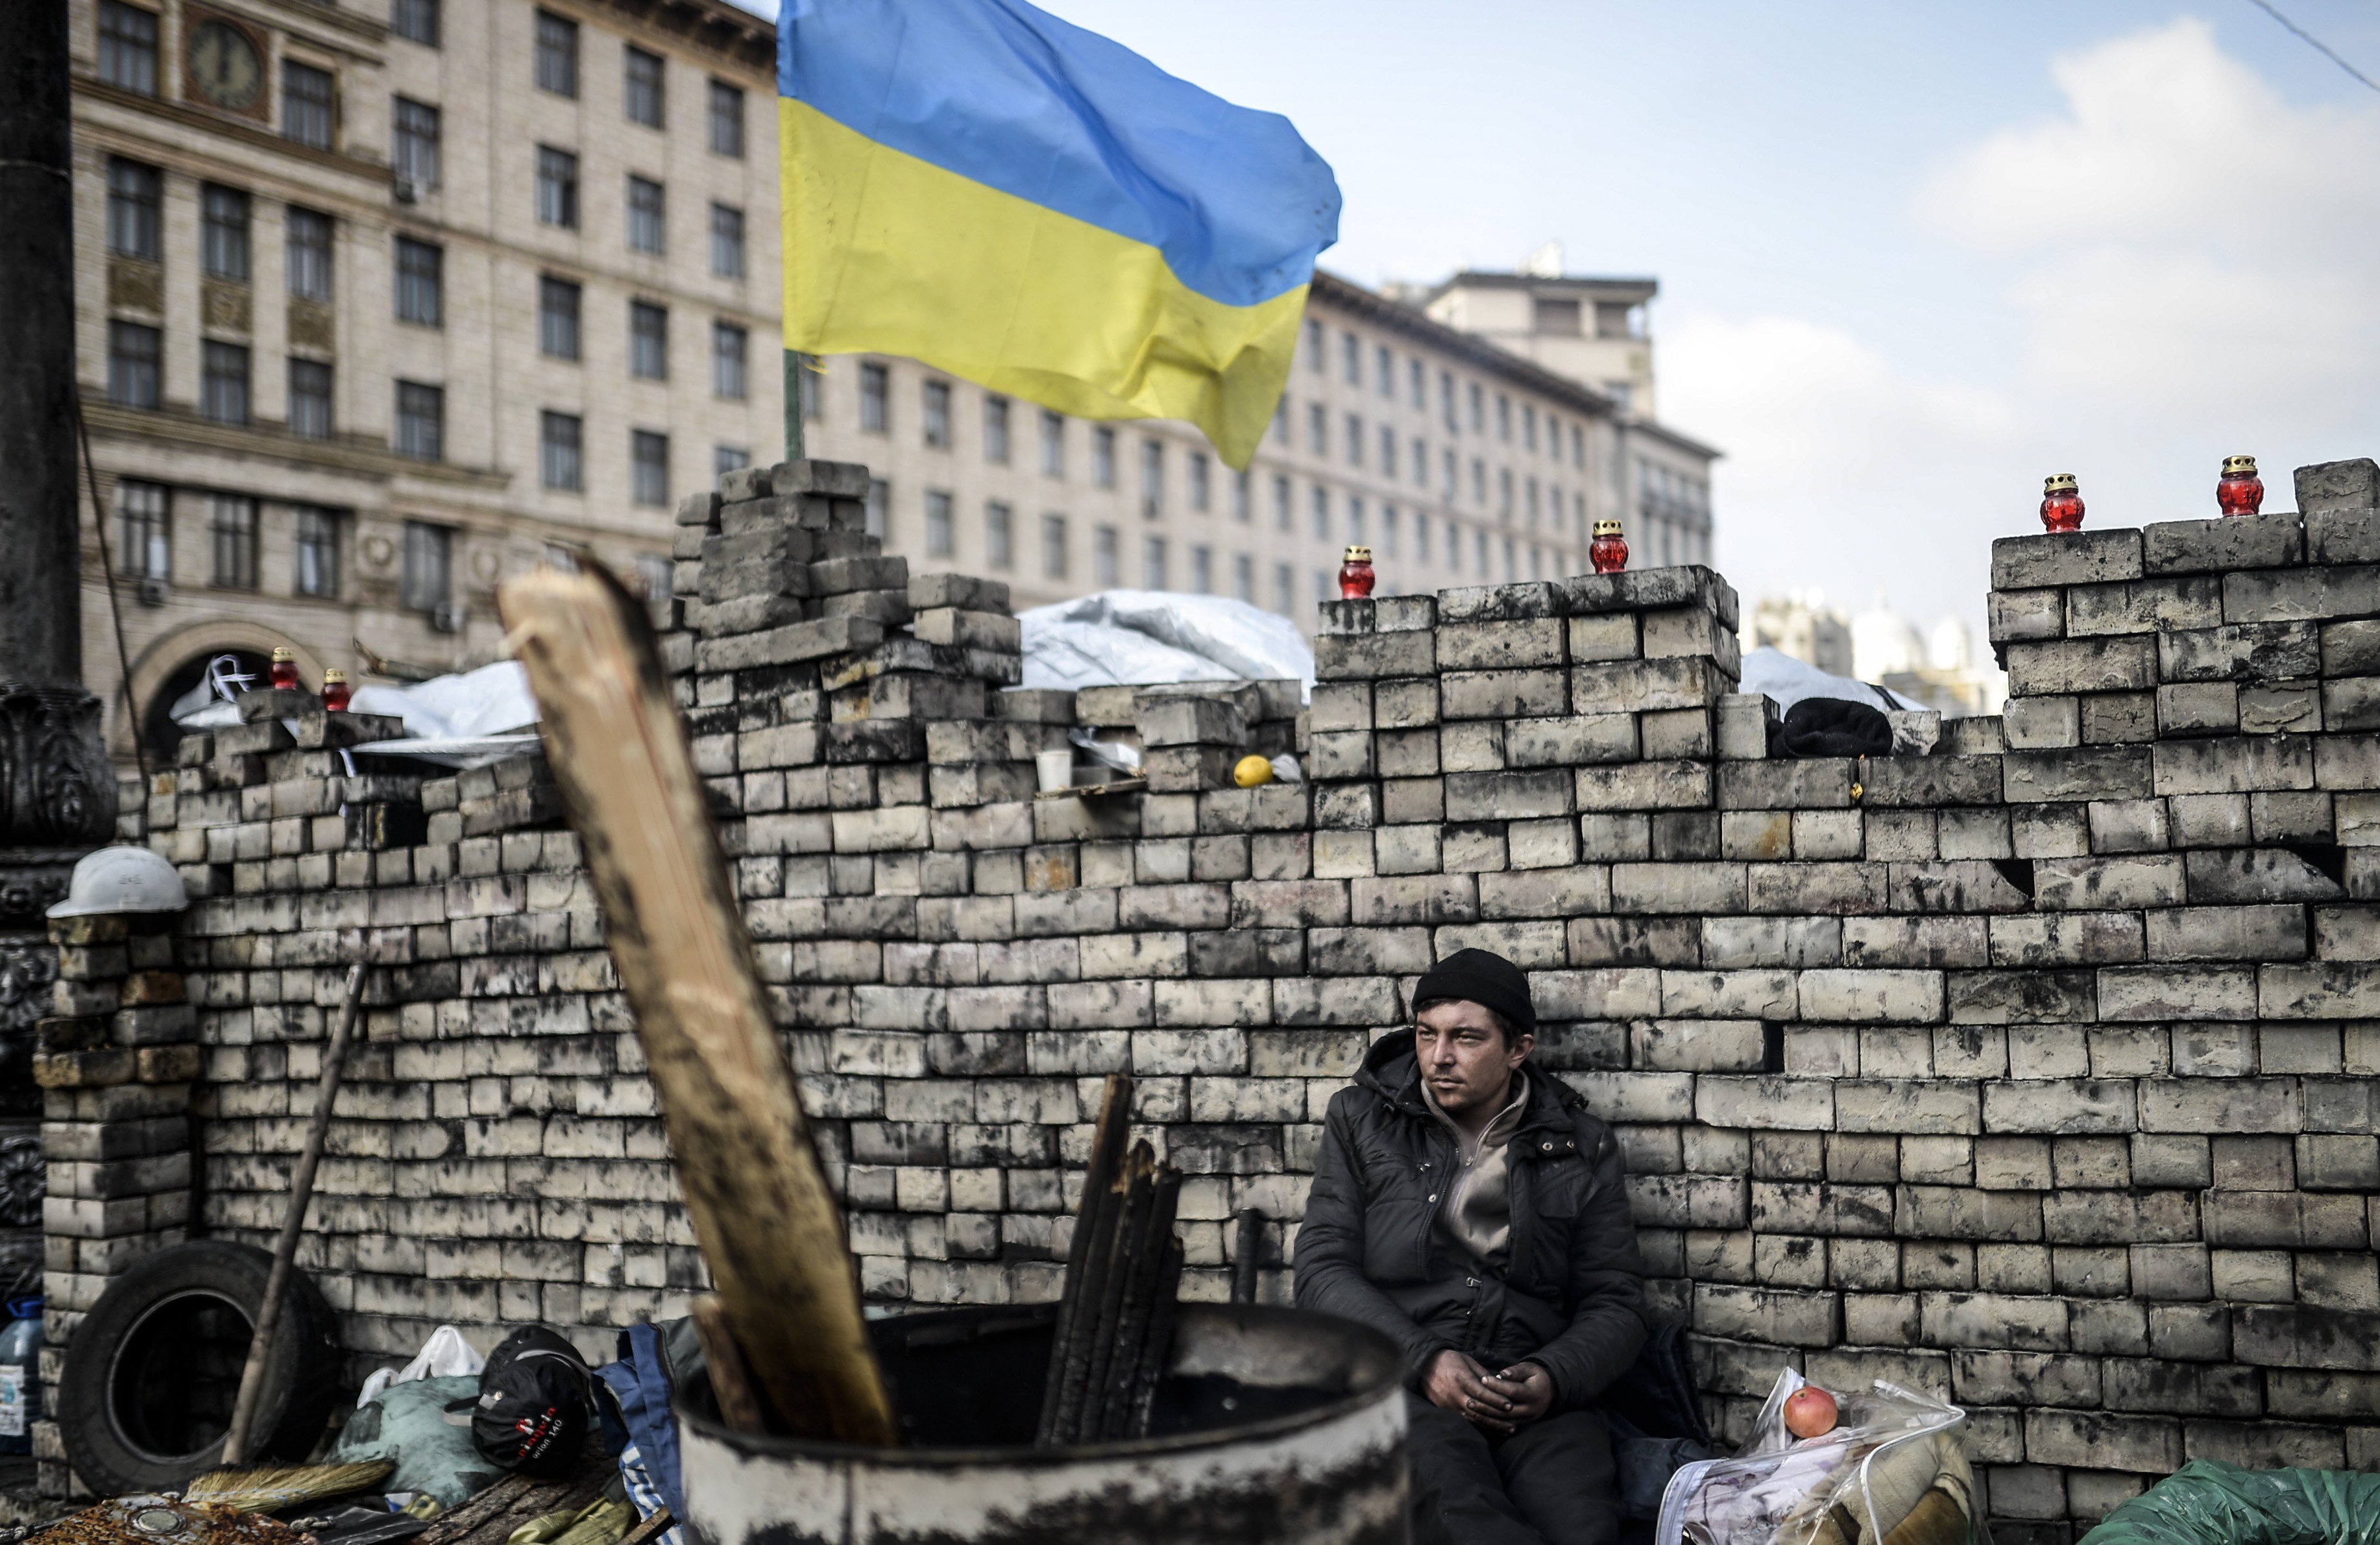 An anti-government protester sits behind a barricade on Kiev's Independence Square on February 24, 2014.